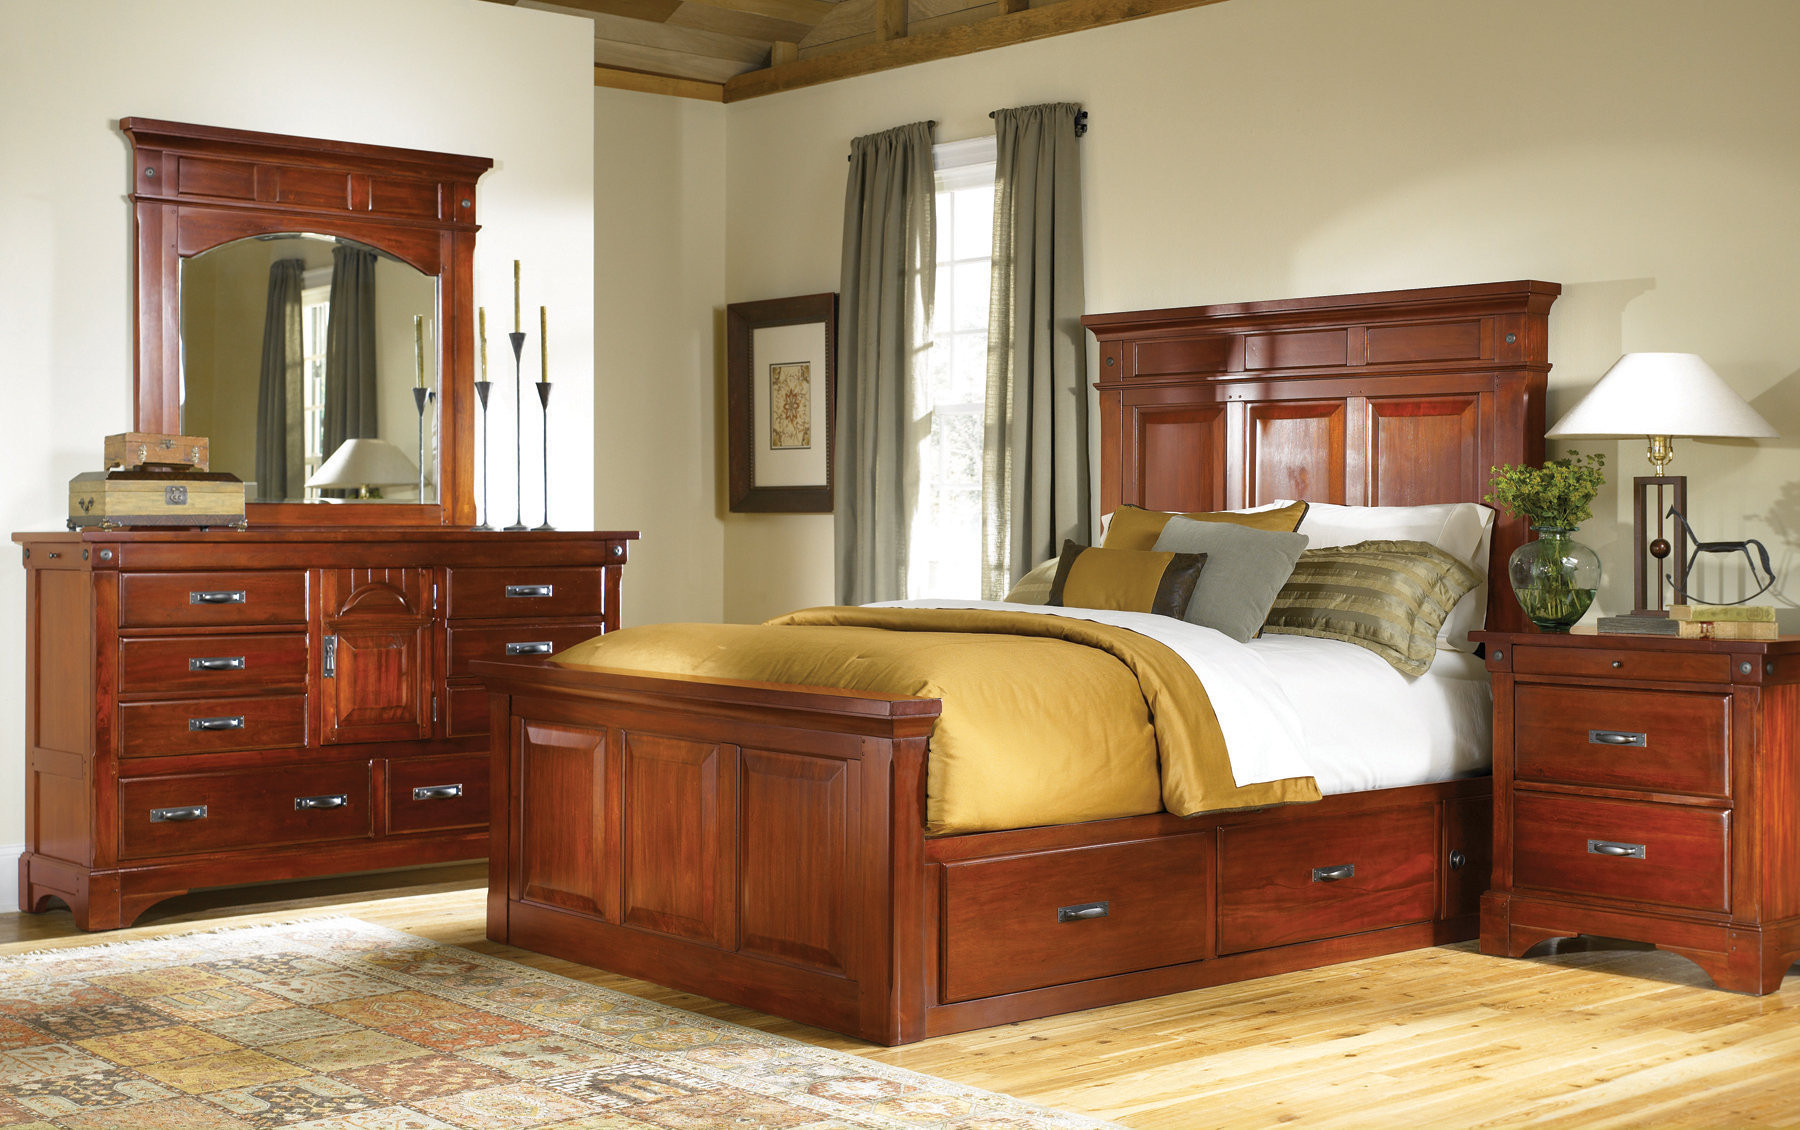 Queen Bedroom Sets With Storage
 Mahogany Storage Bed Classic King and Queen Solid Wood